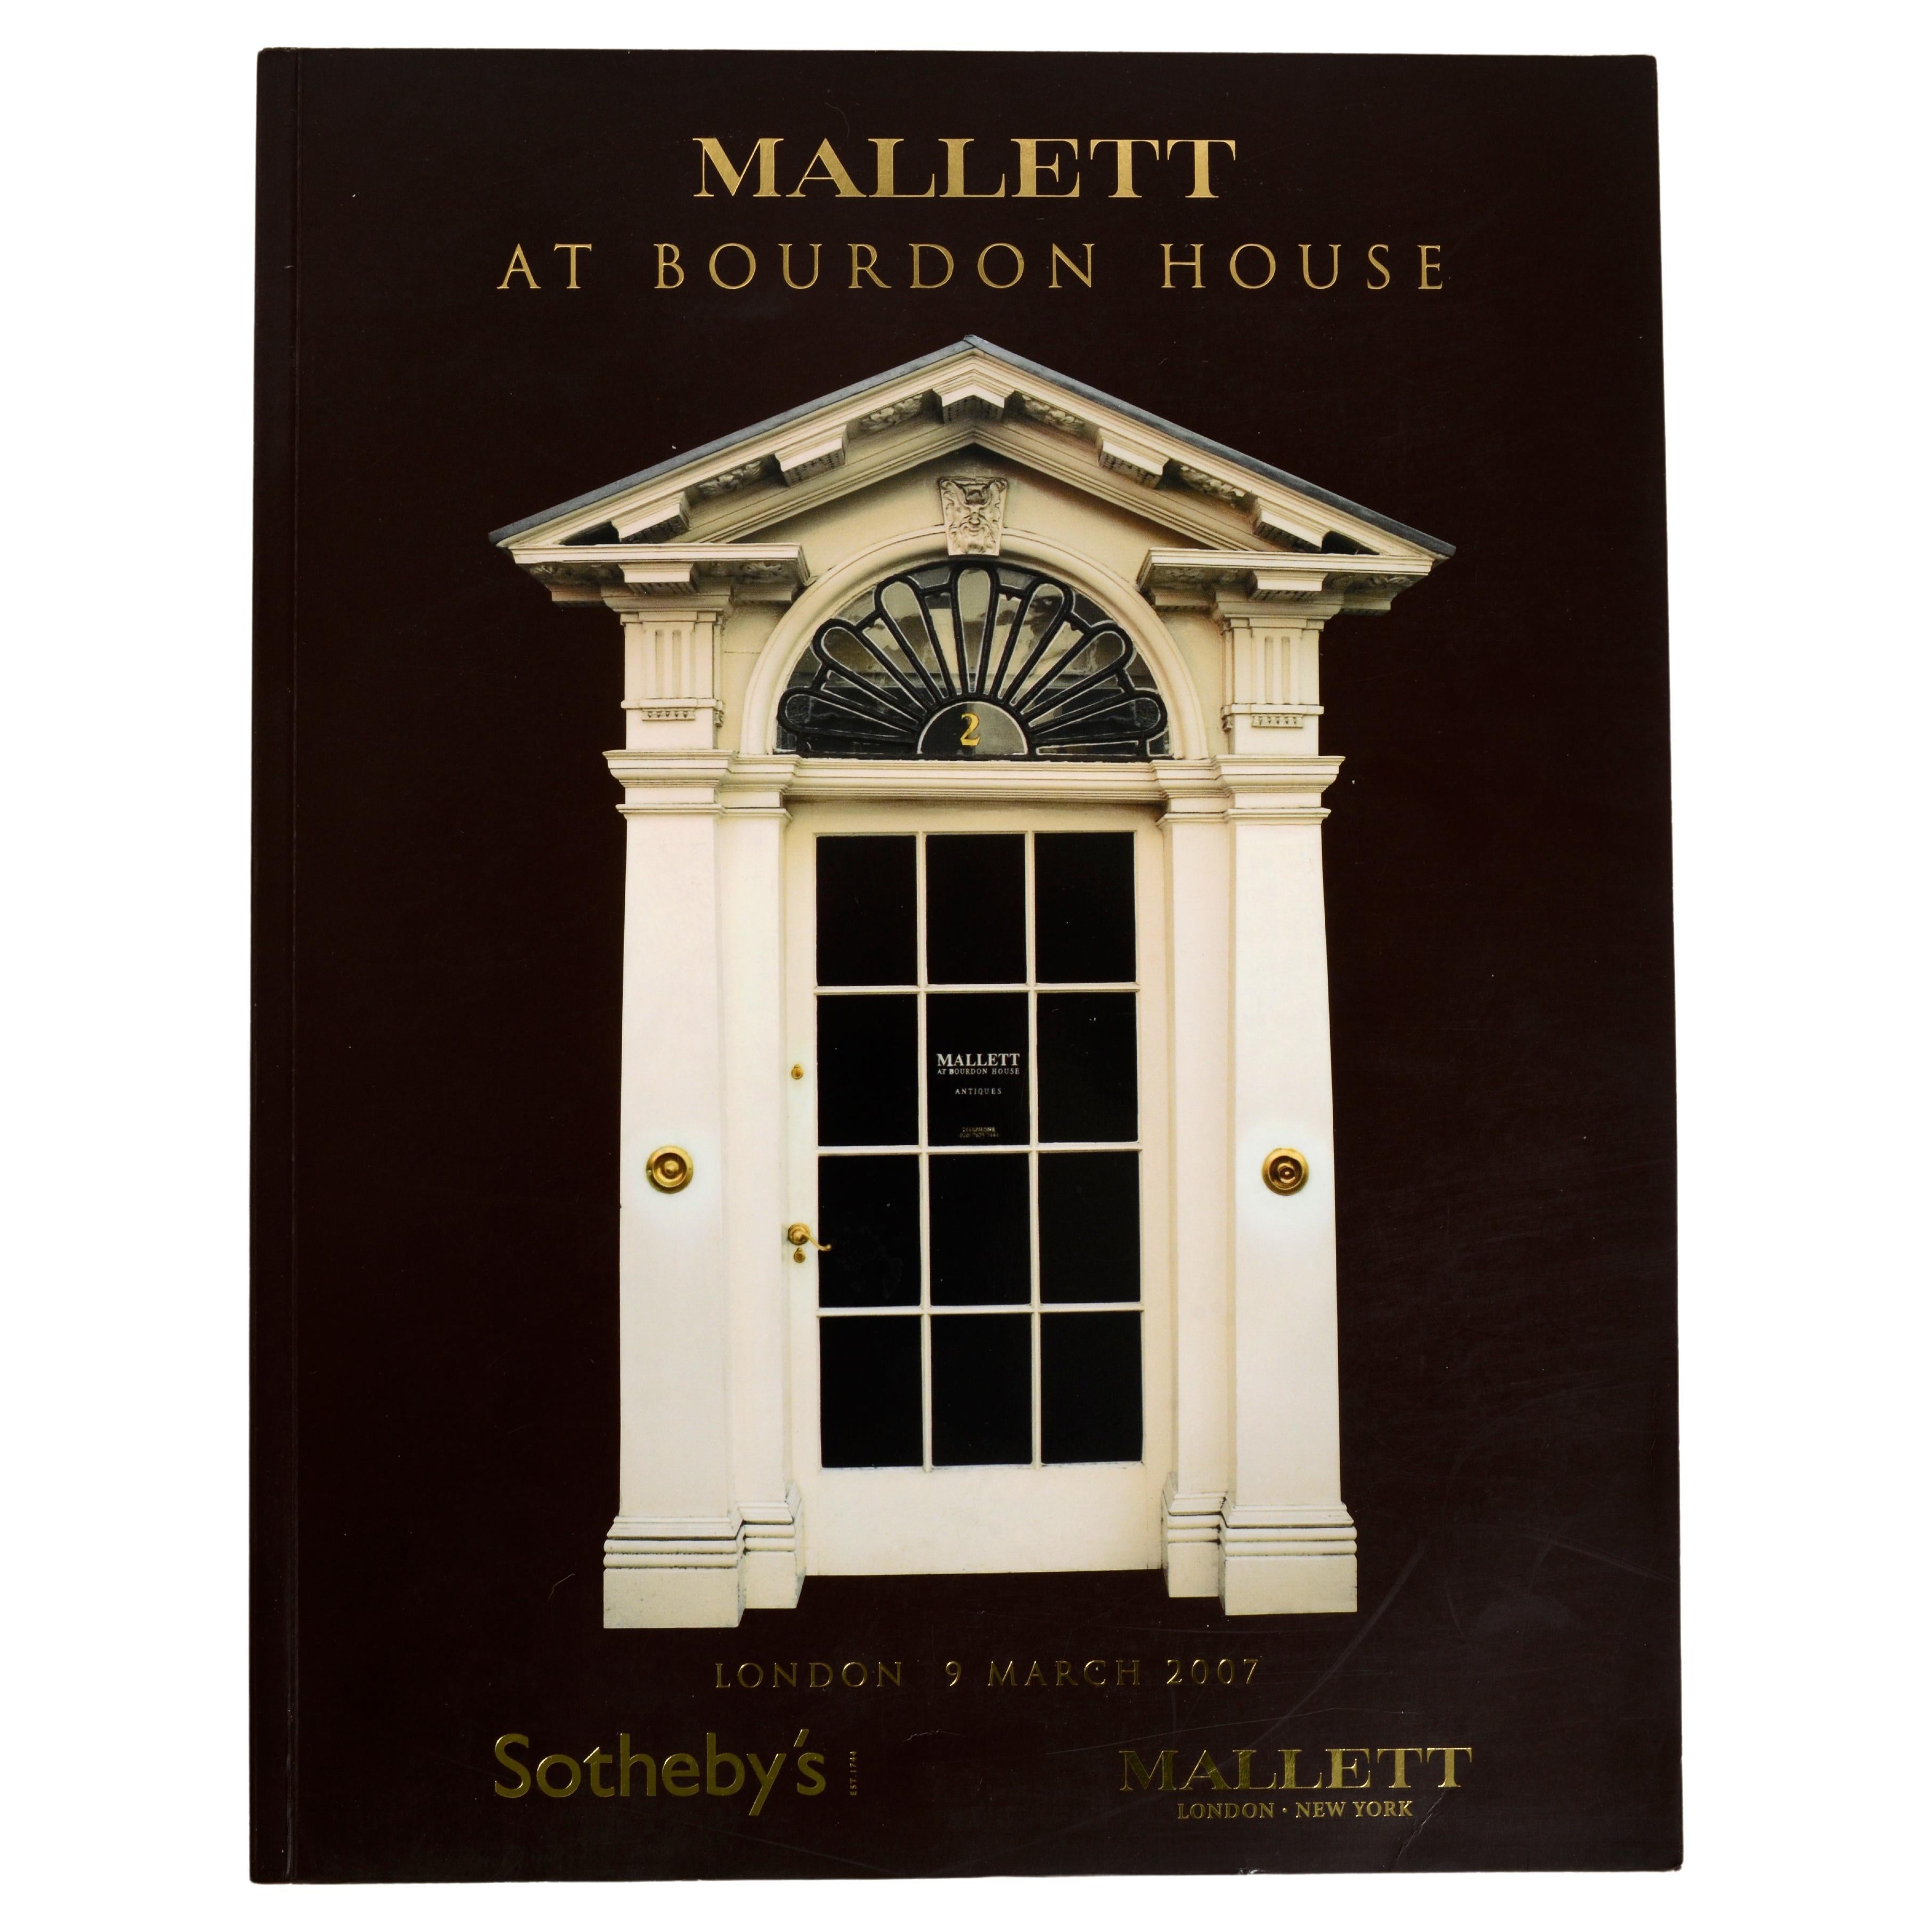 Mallet at Bourdon House, London March 9, 2007, Sotheby's